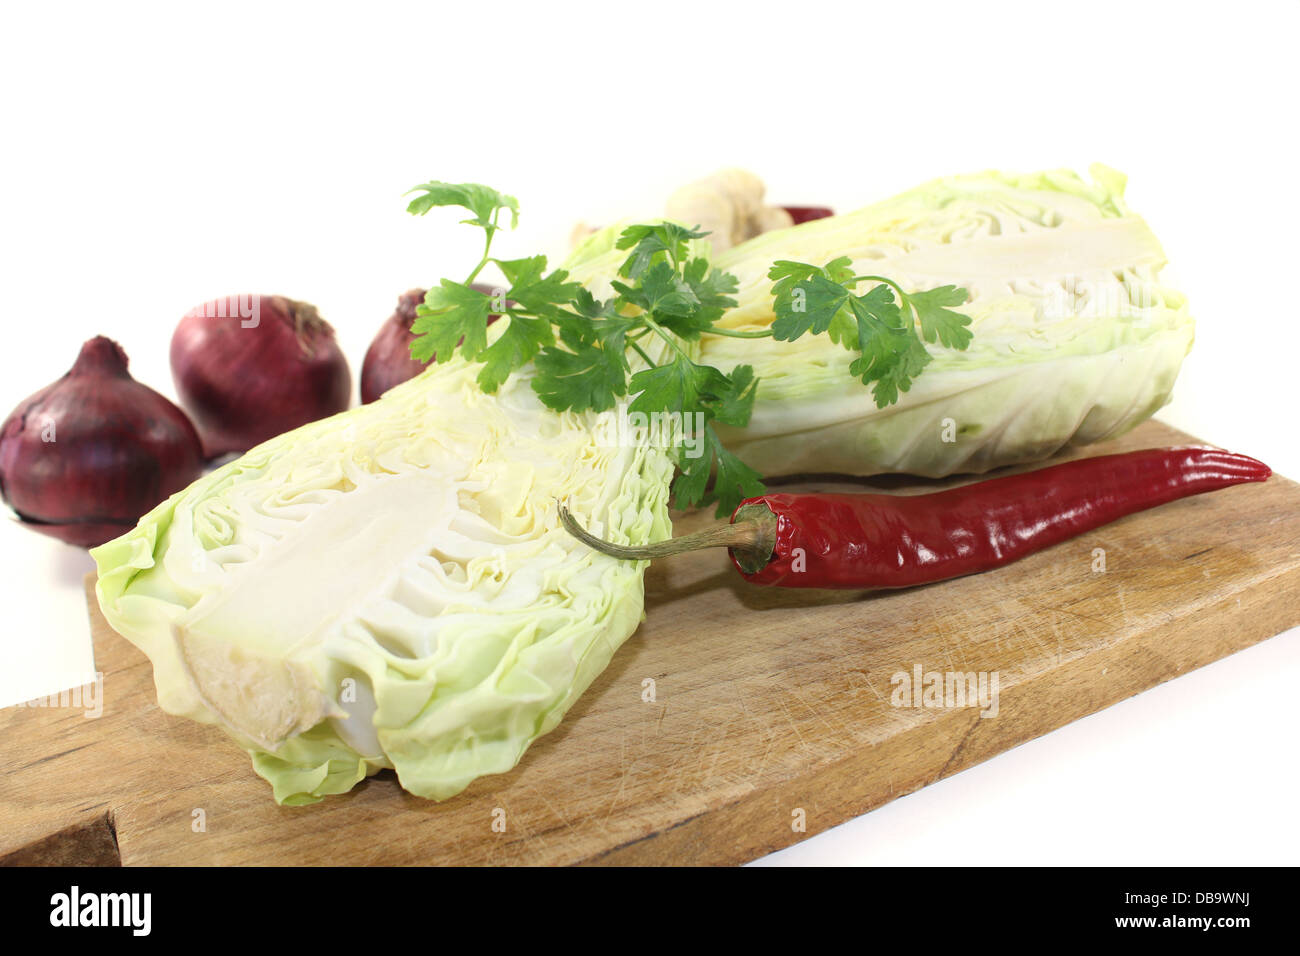 sweetheart cabbage with parsley, garlic and onions on a light background Stock Photo